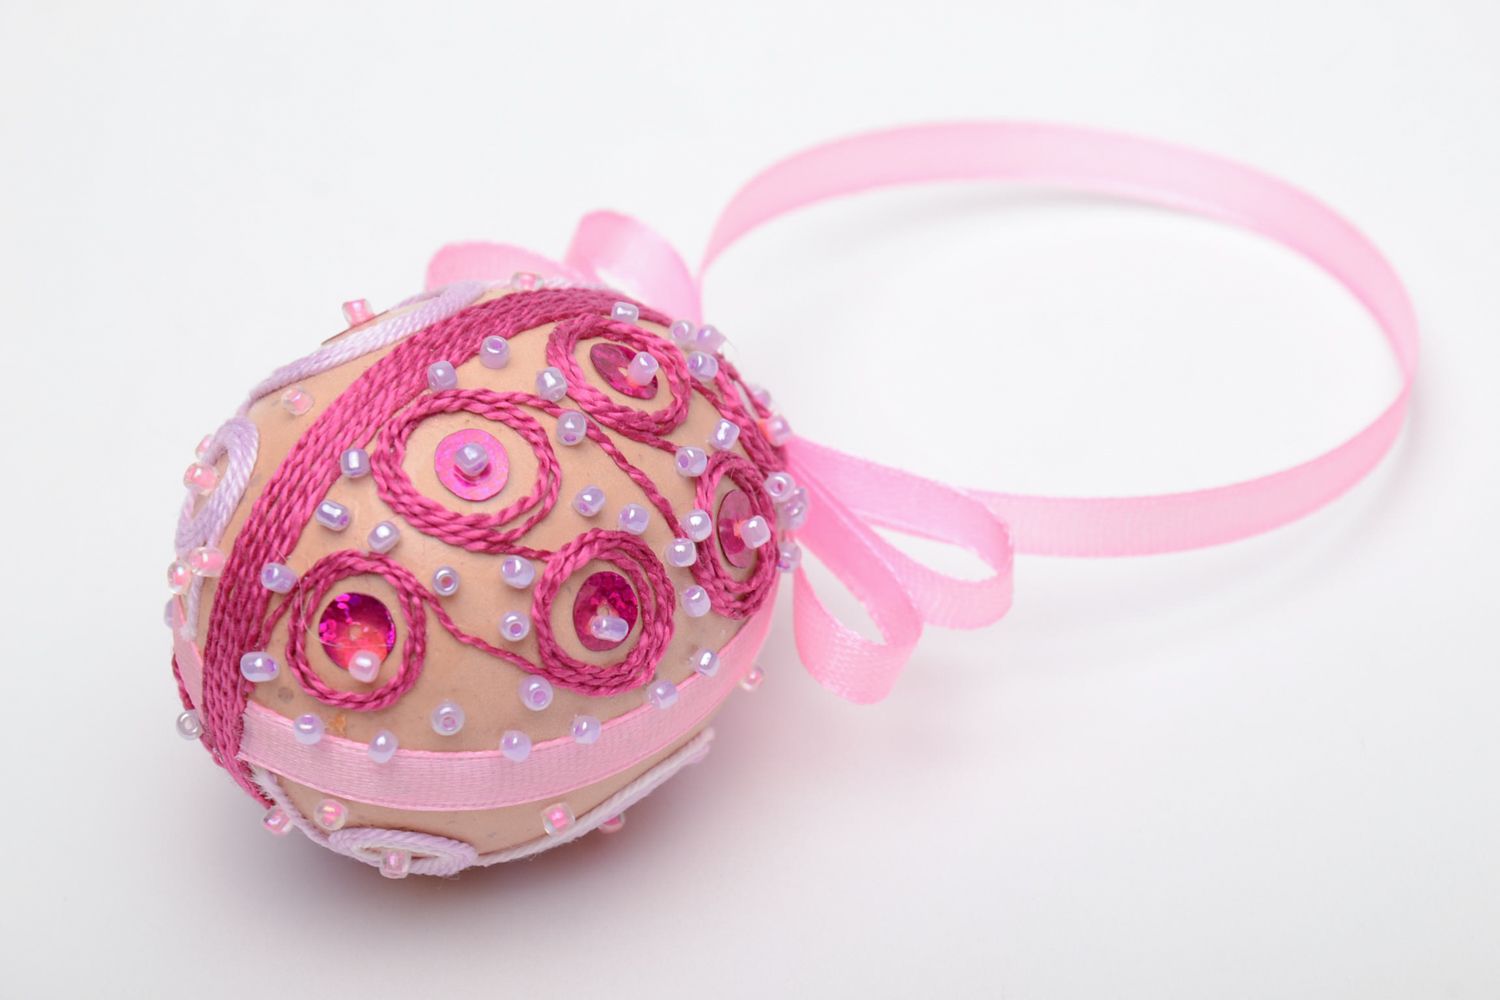 Beaded Easter egg with ribbons photo 4